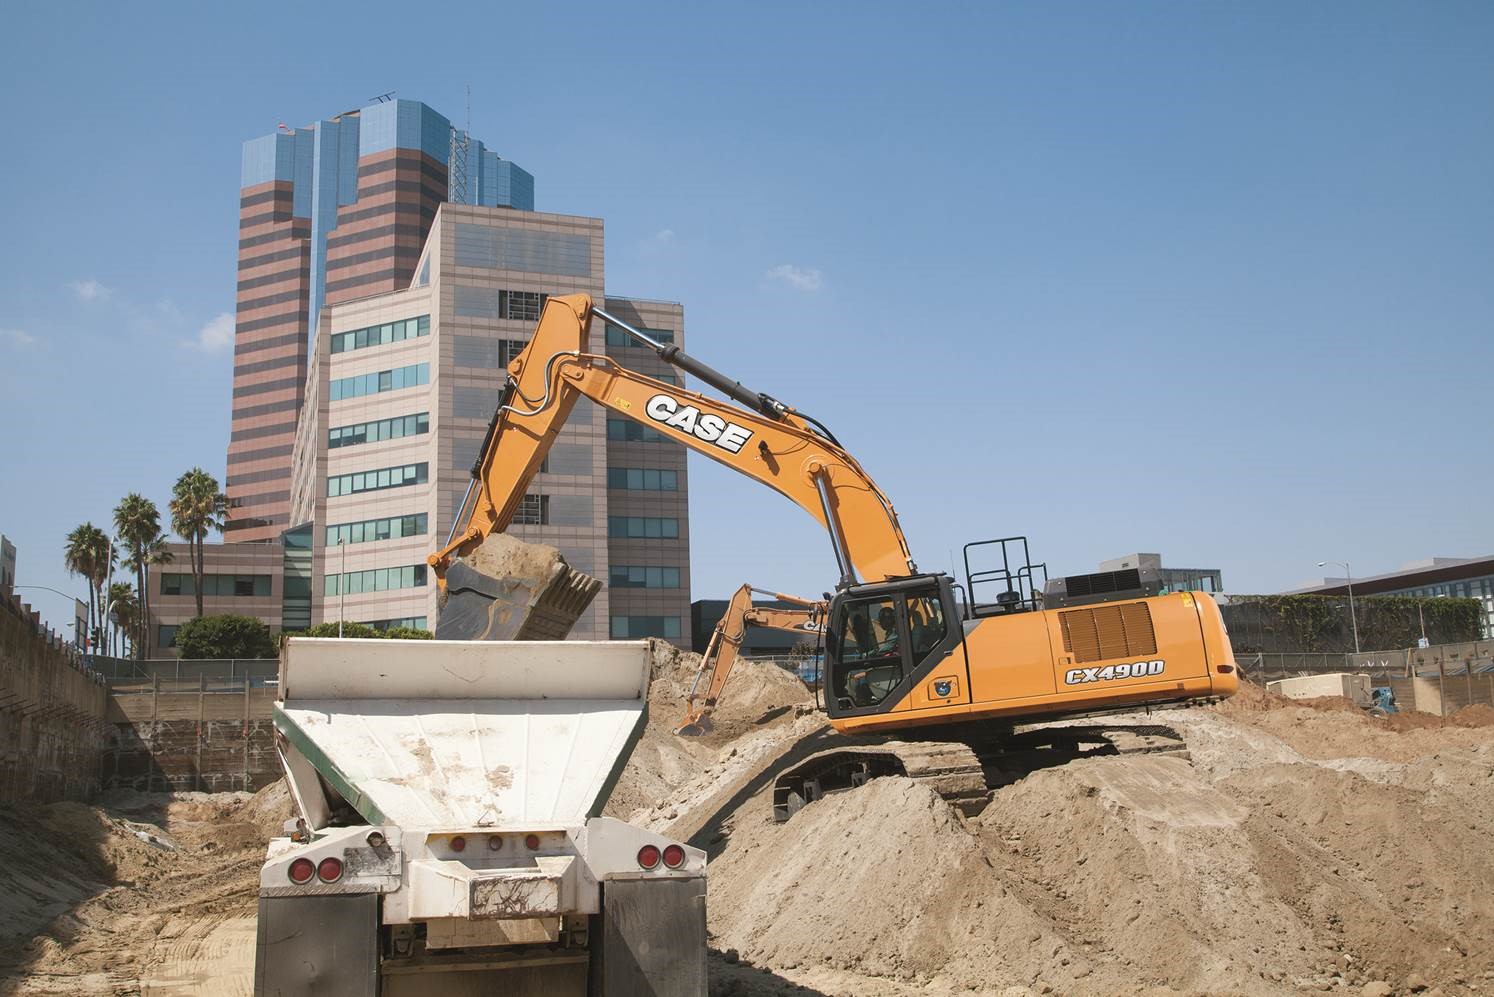 CASE Construction Equipment has introduced two new crawler excavators to its D Series lineup